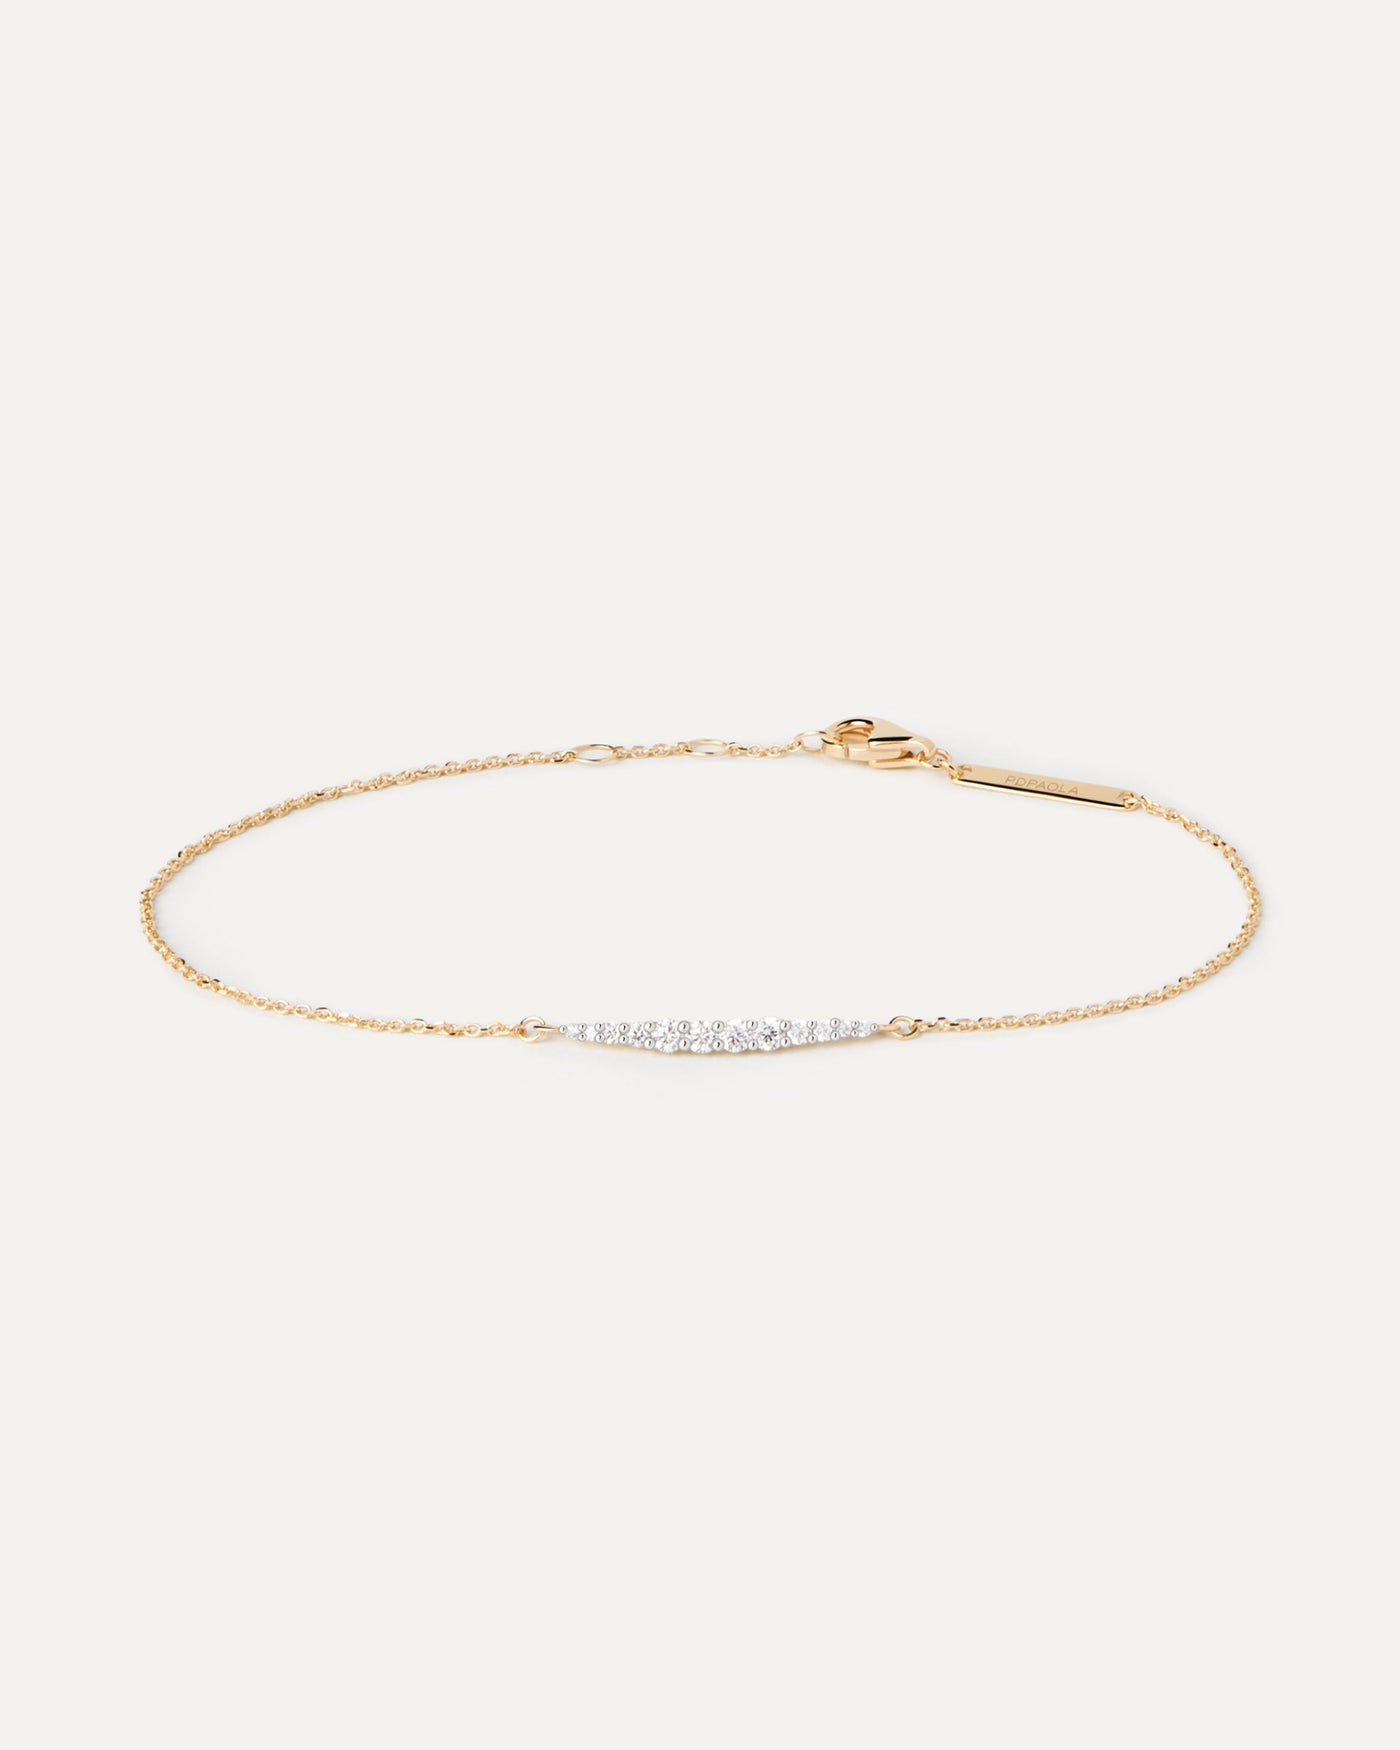 2024 Selection | Diamonds And Gold Kate Bracelet. Solid yellow gold bracelet with a 12-pavé diamond motiv of 0.17 carats. Get the latest arrival from PDPAOLA. Place your order safely and get this Best Seller. Free Shipping.